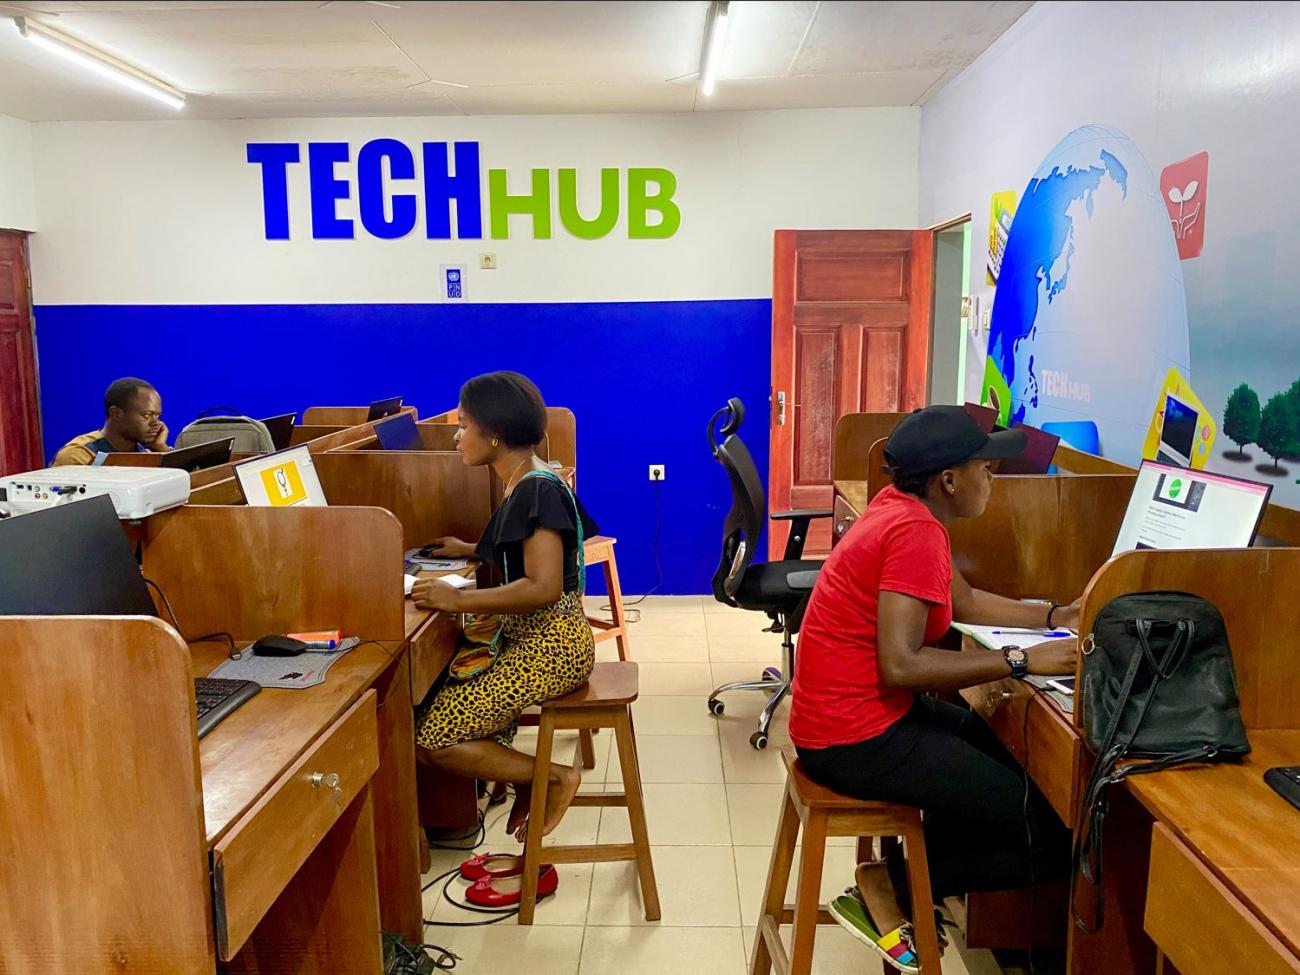 A cross-section of the Tech Hub of the FEP